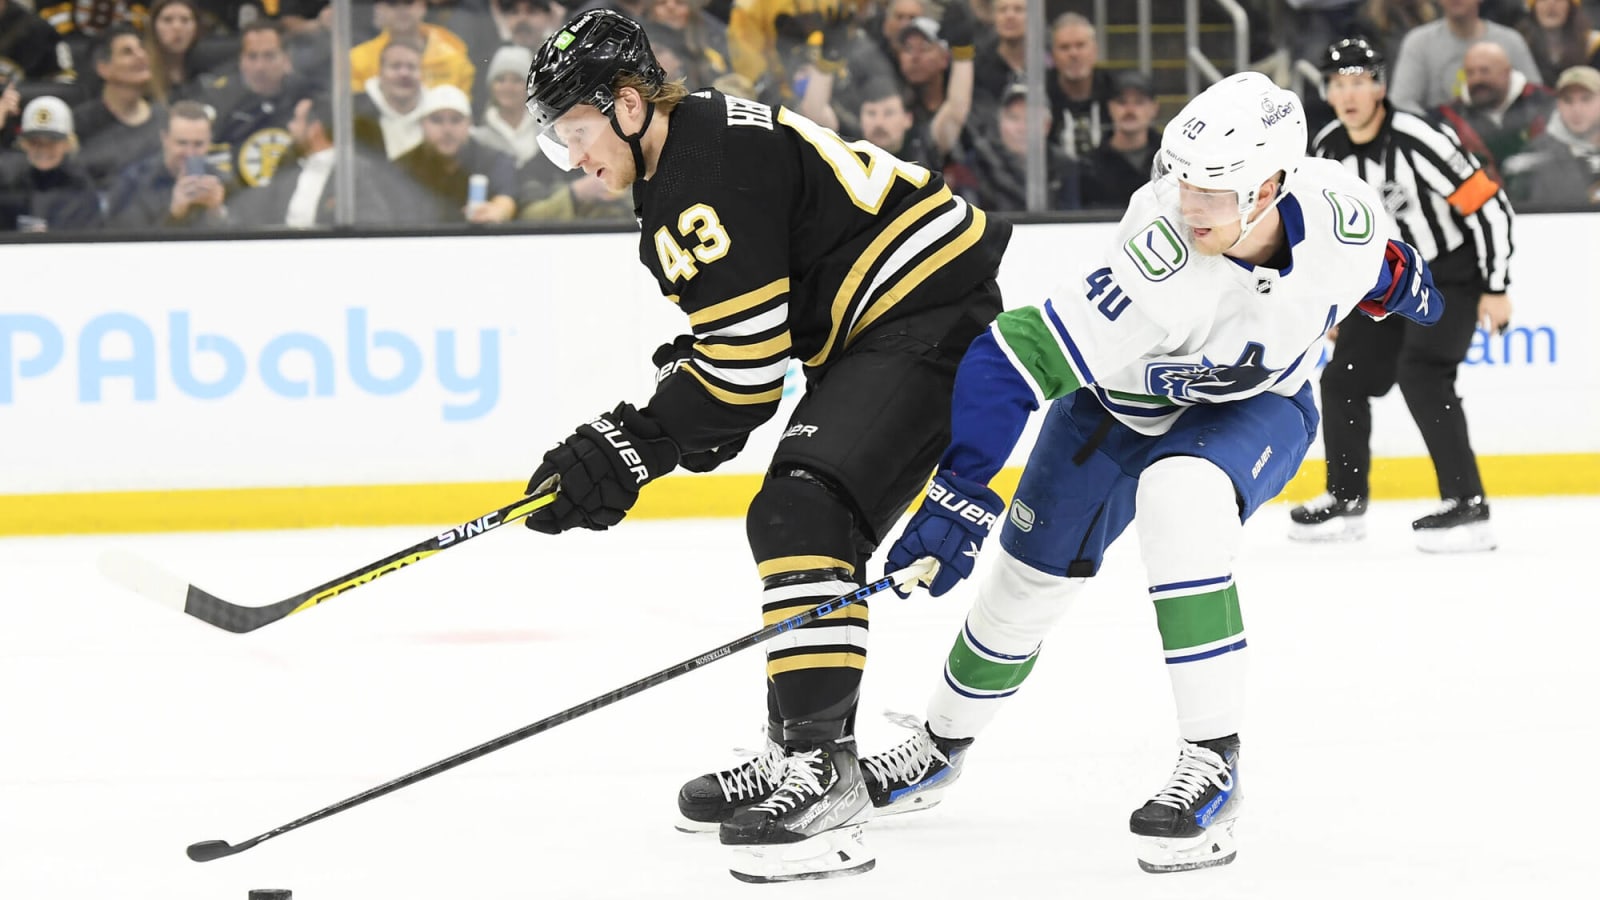 Vancouver Canucks’ 3 stars of the week: Elias Pettersson, Thatcher Demko, and Filip Hronek lead the way in return from All-Star break